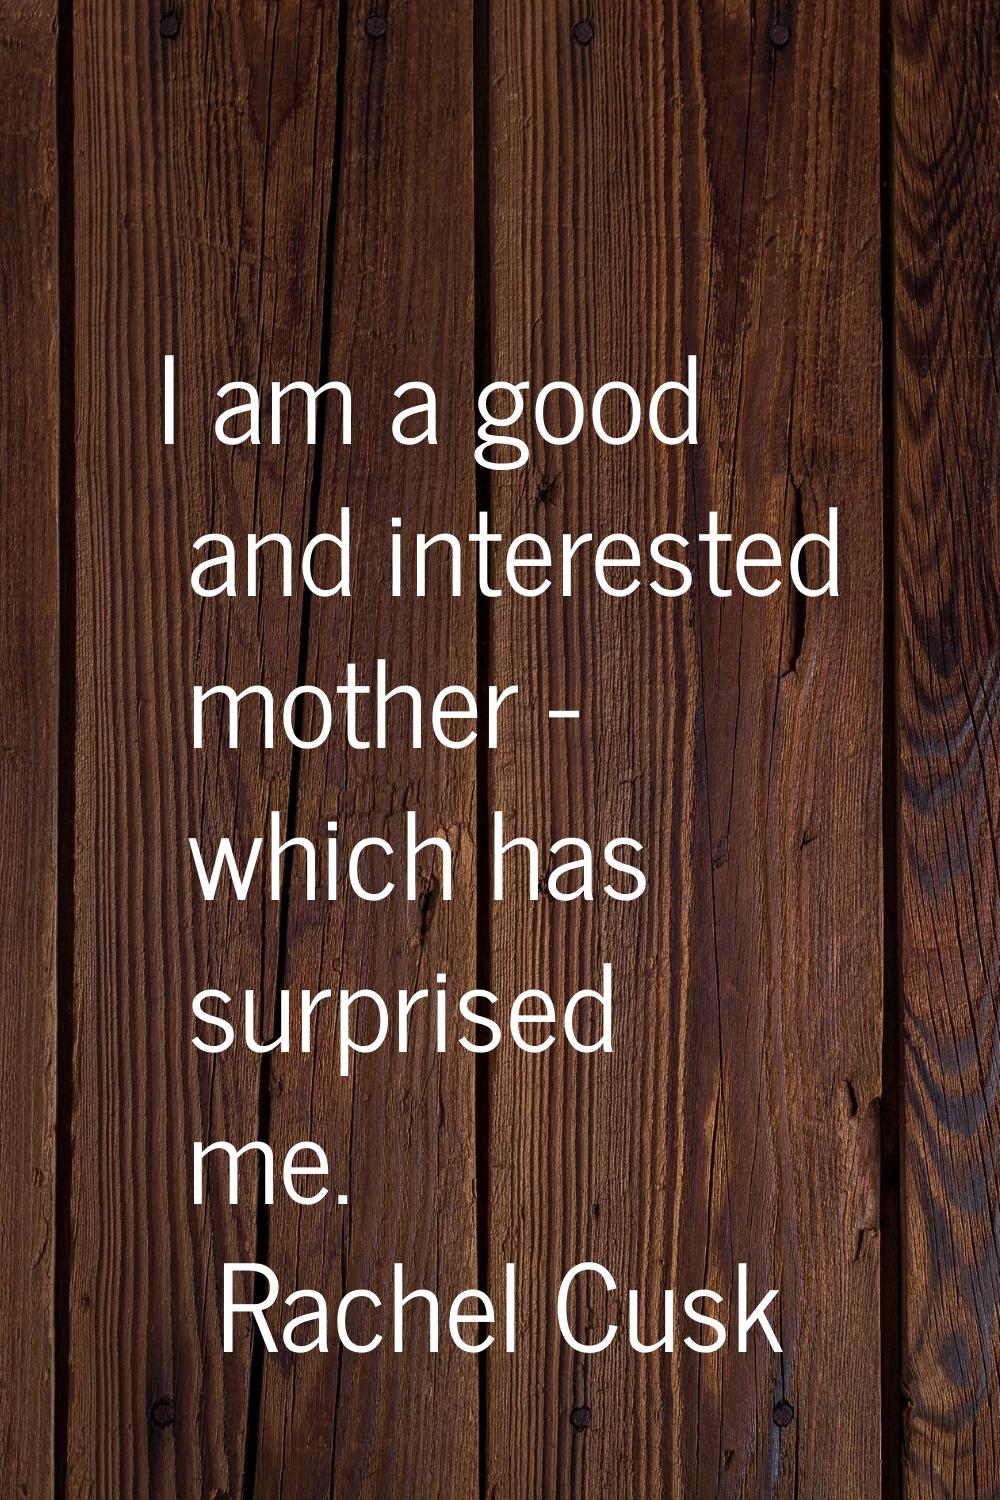 I am a good and interested mother - which has surprised me.